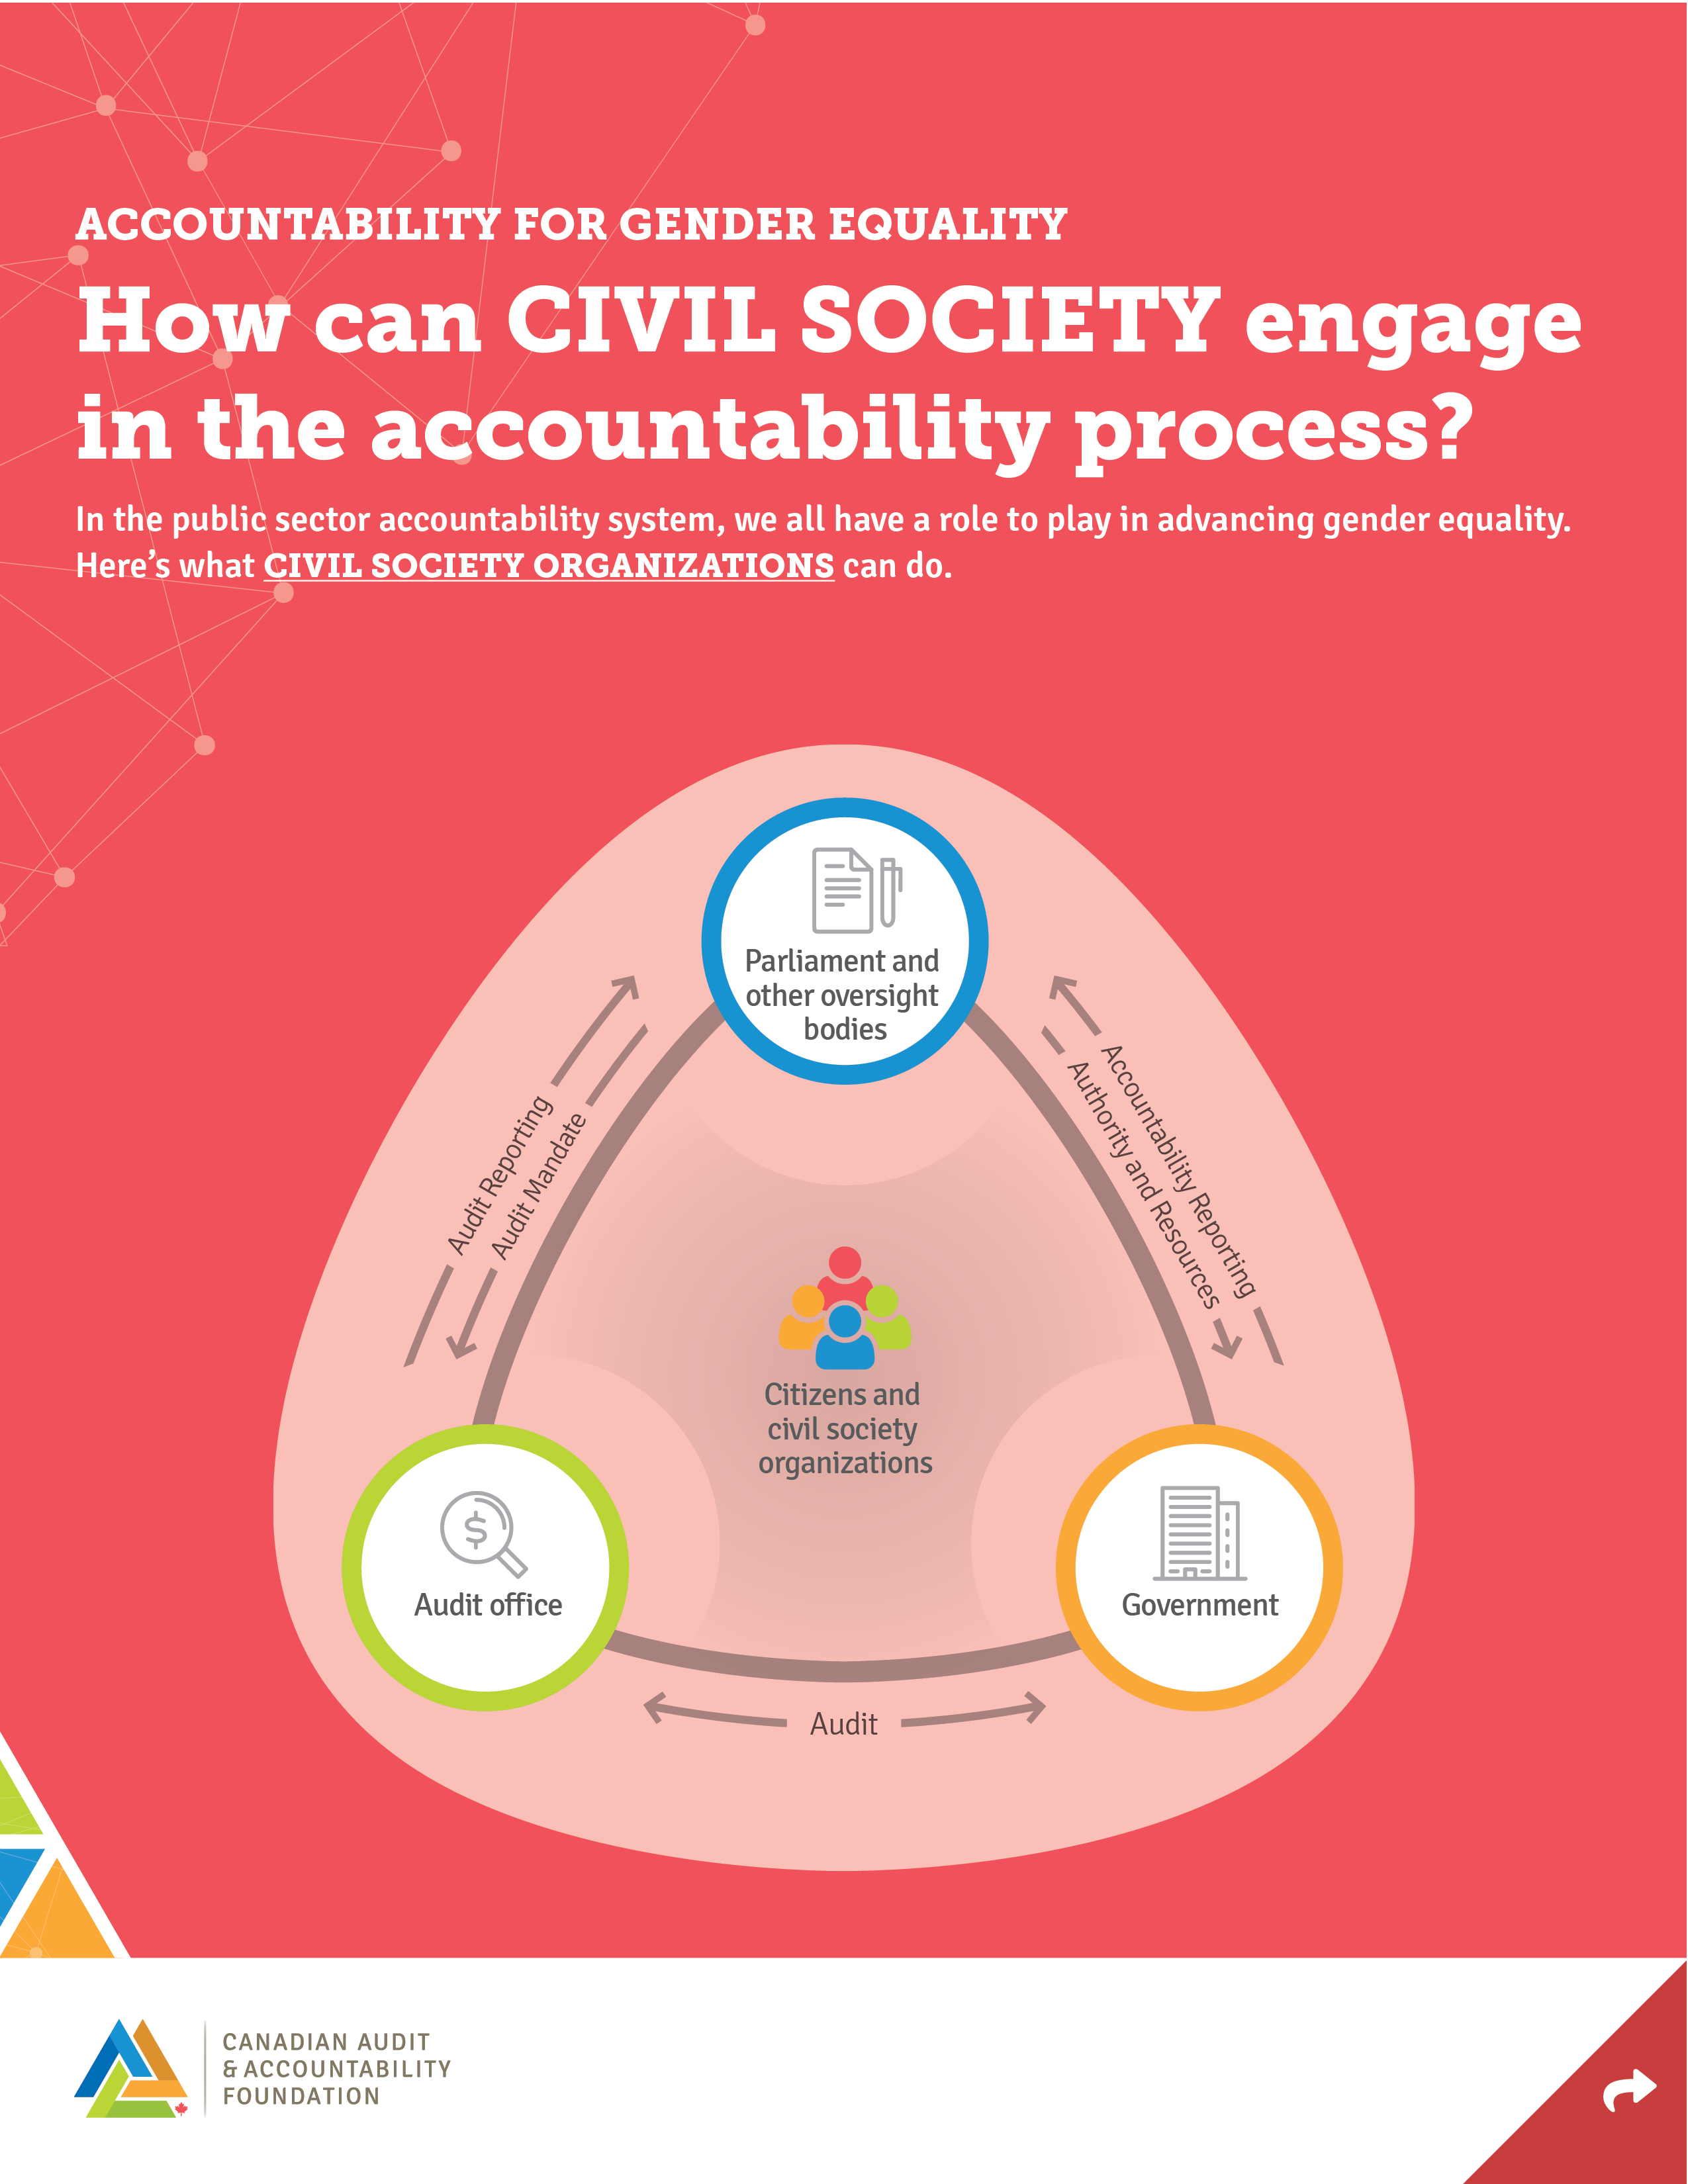 Accountability for Gender Equality: How can civil society engage in the accountability process?